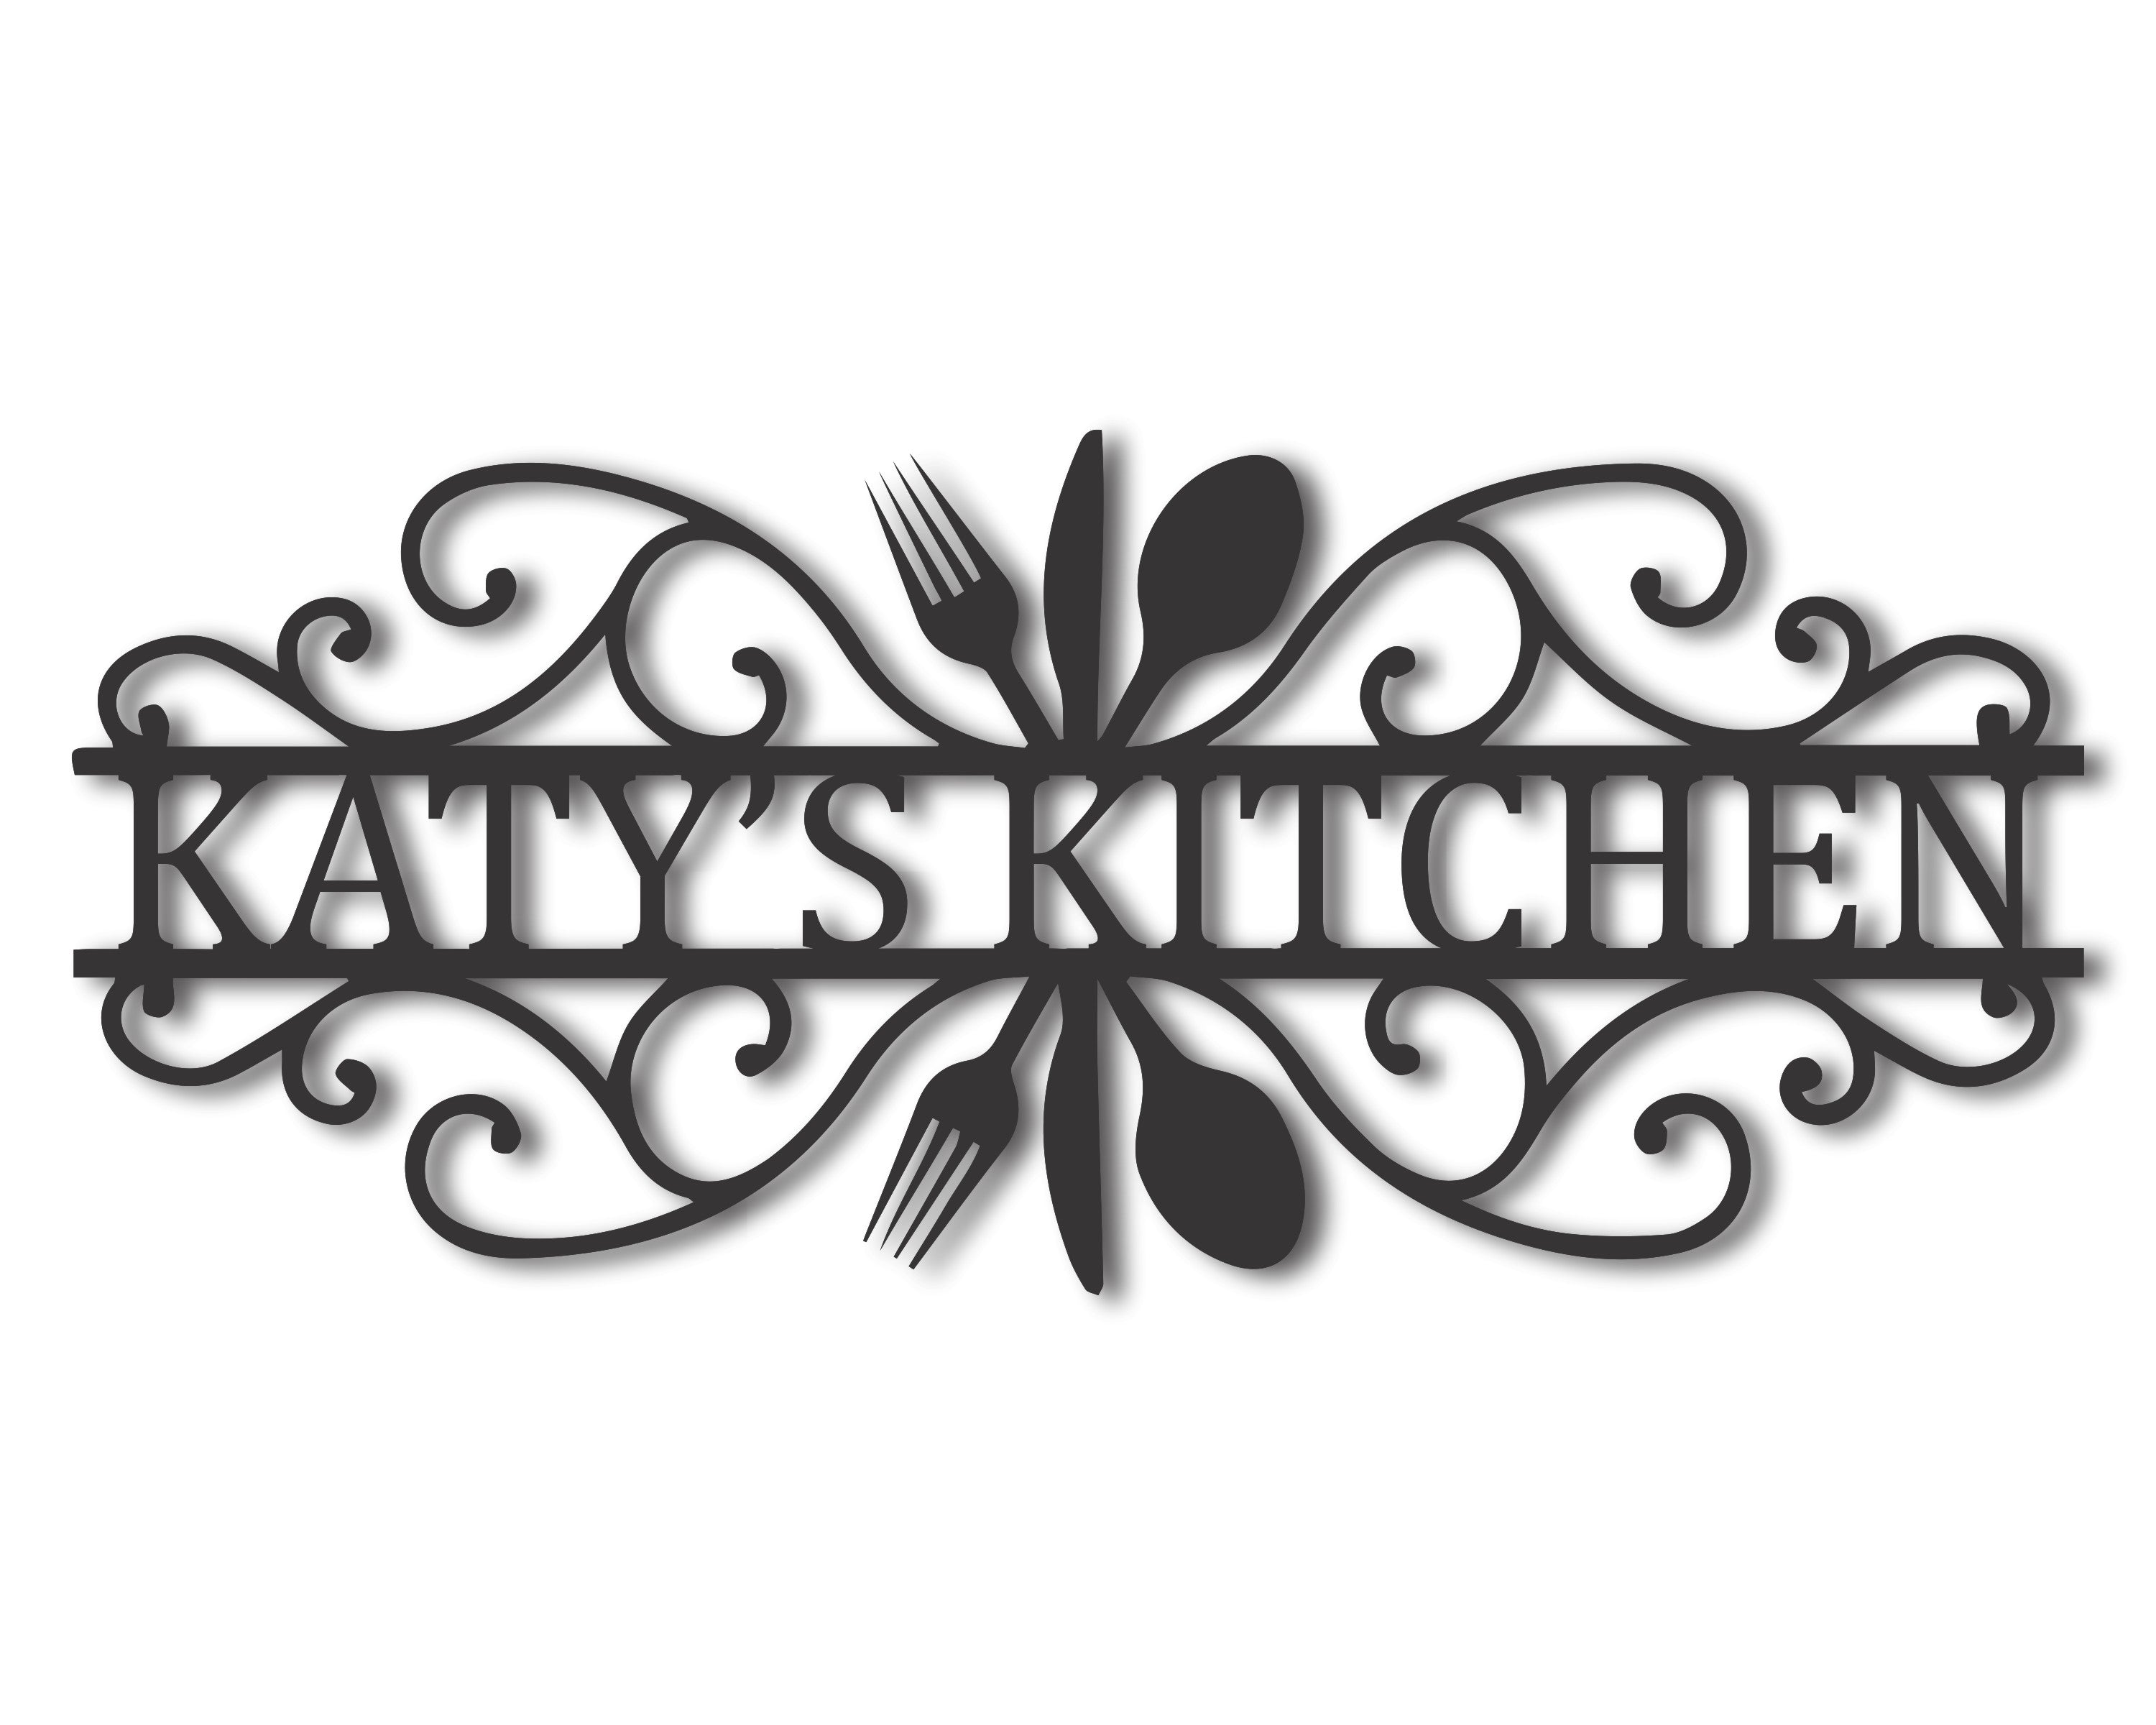 Metal Kitchen Silverware Sign | Farmhouse Kitchen Signs | 15 Color Options